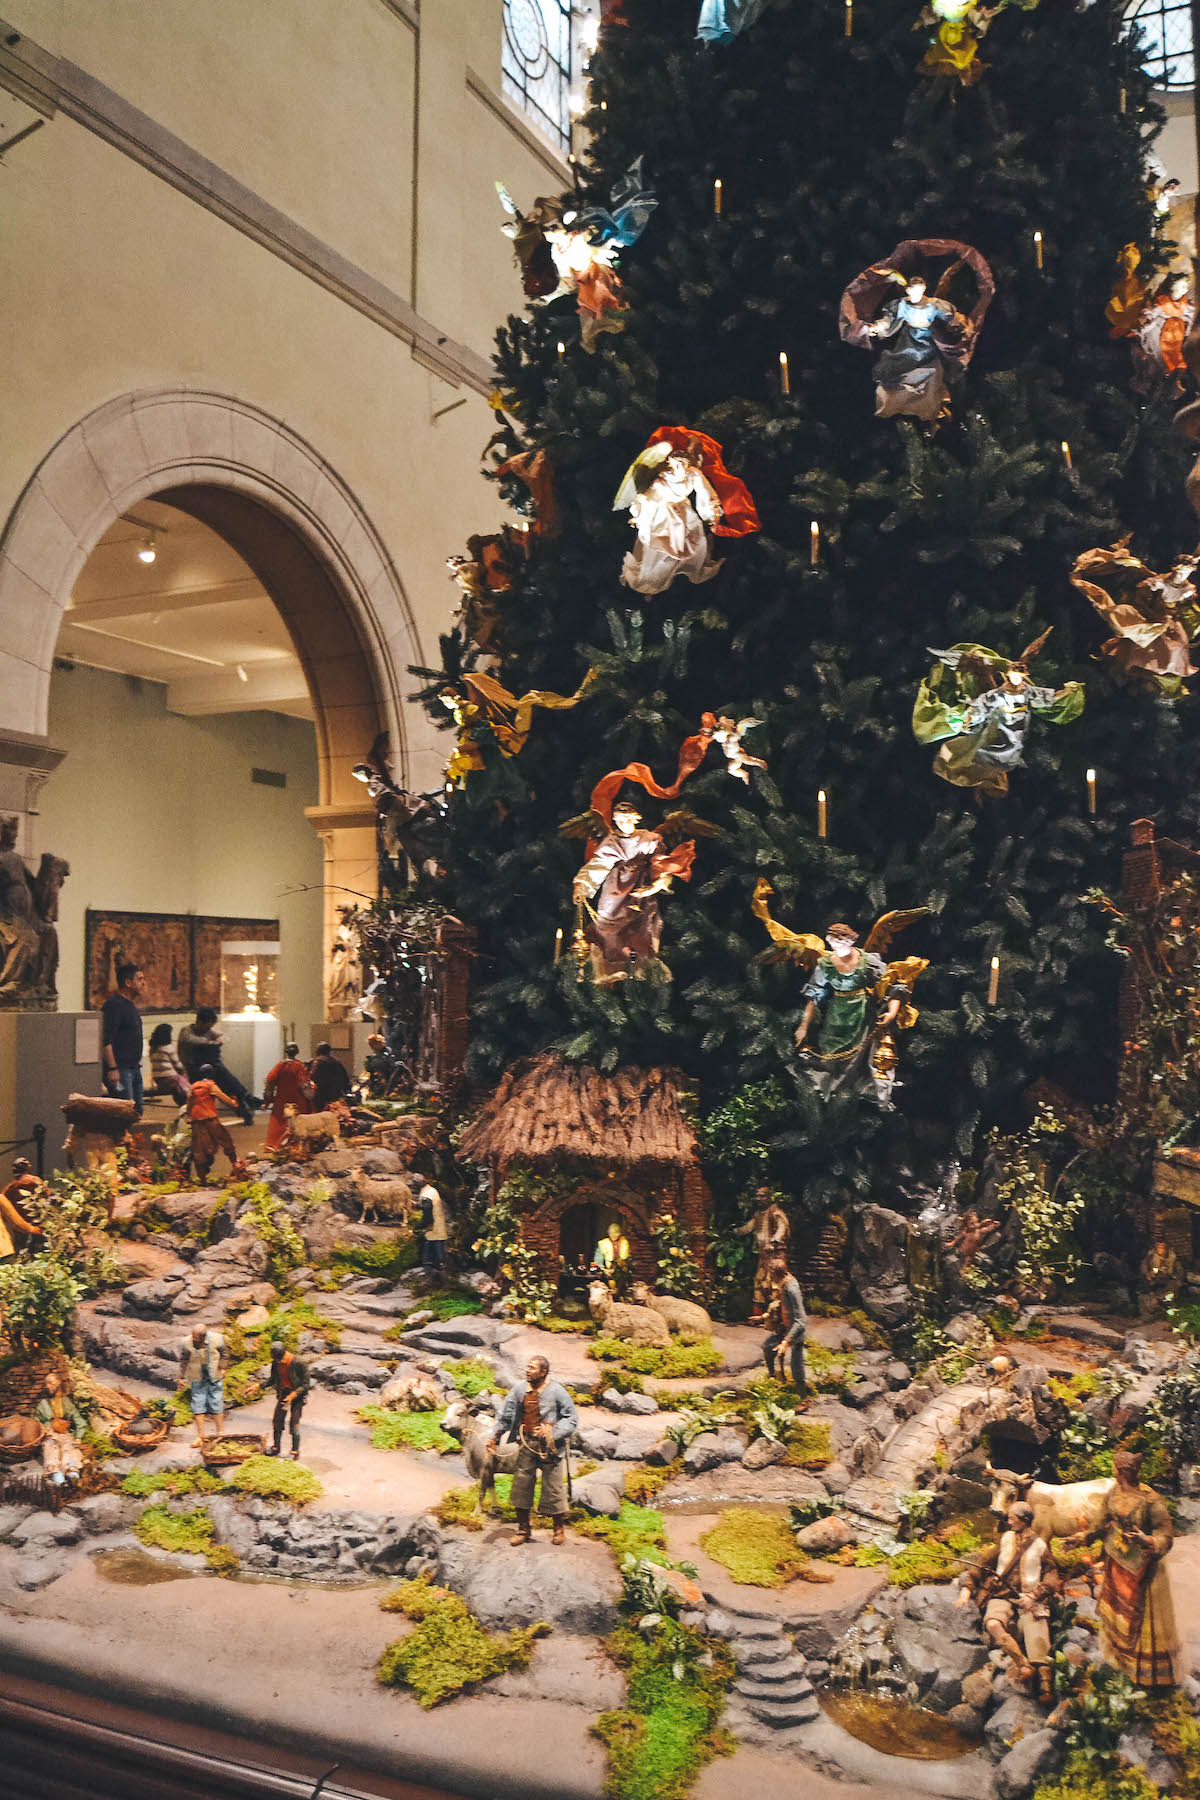 Close up view of the nativity set up beneath the Met Museum Christmas tree in NYC.